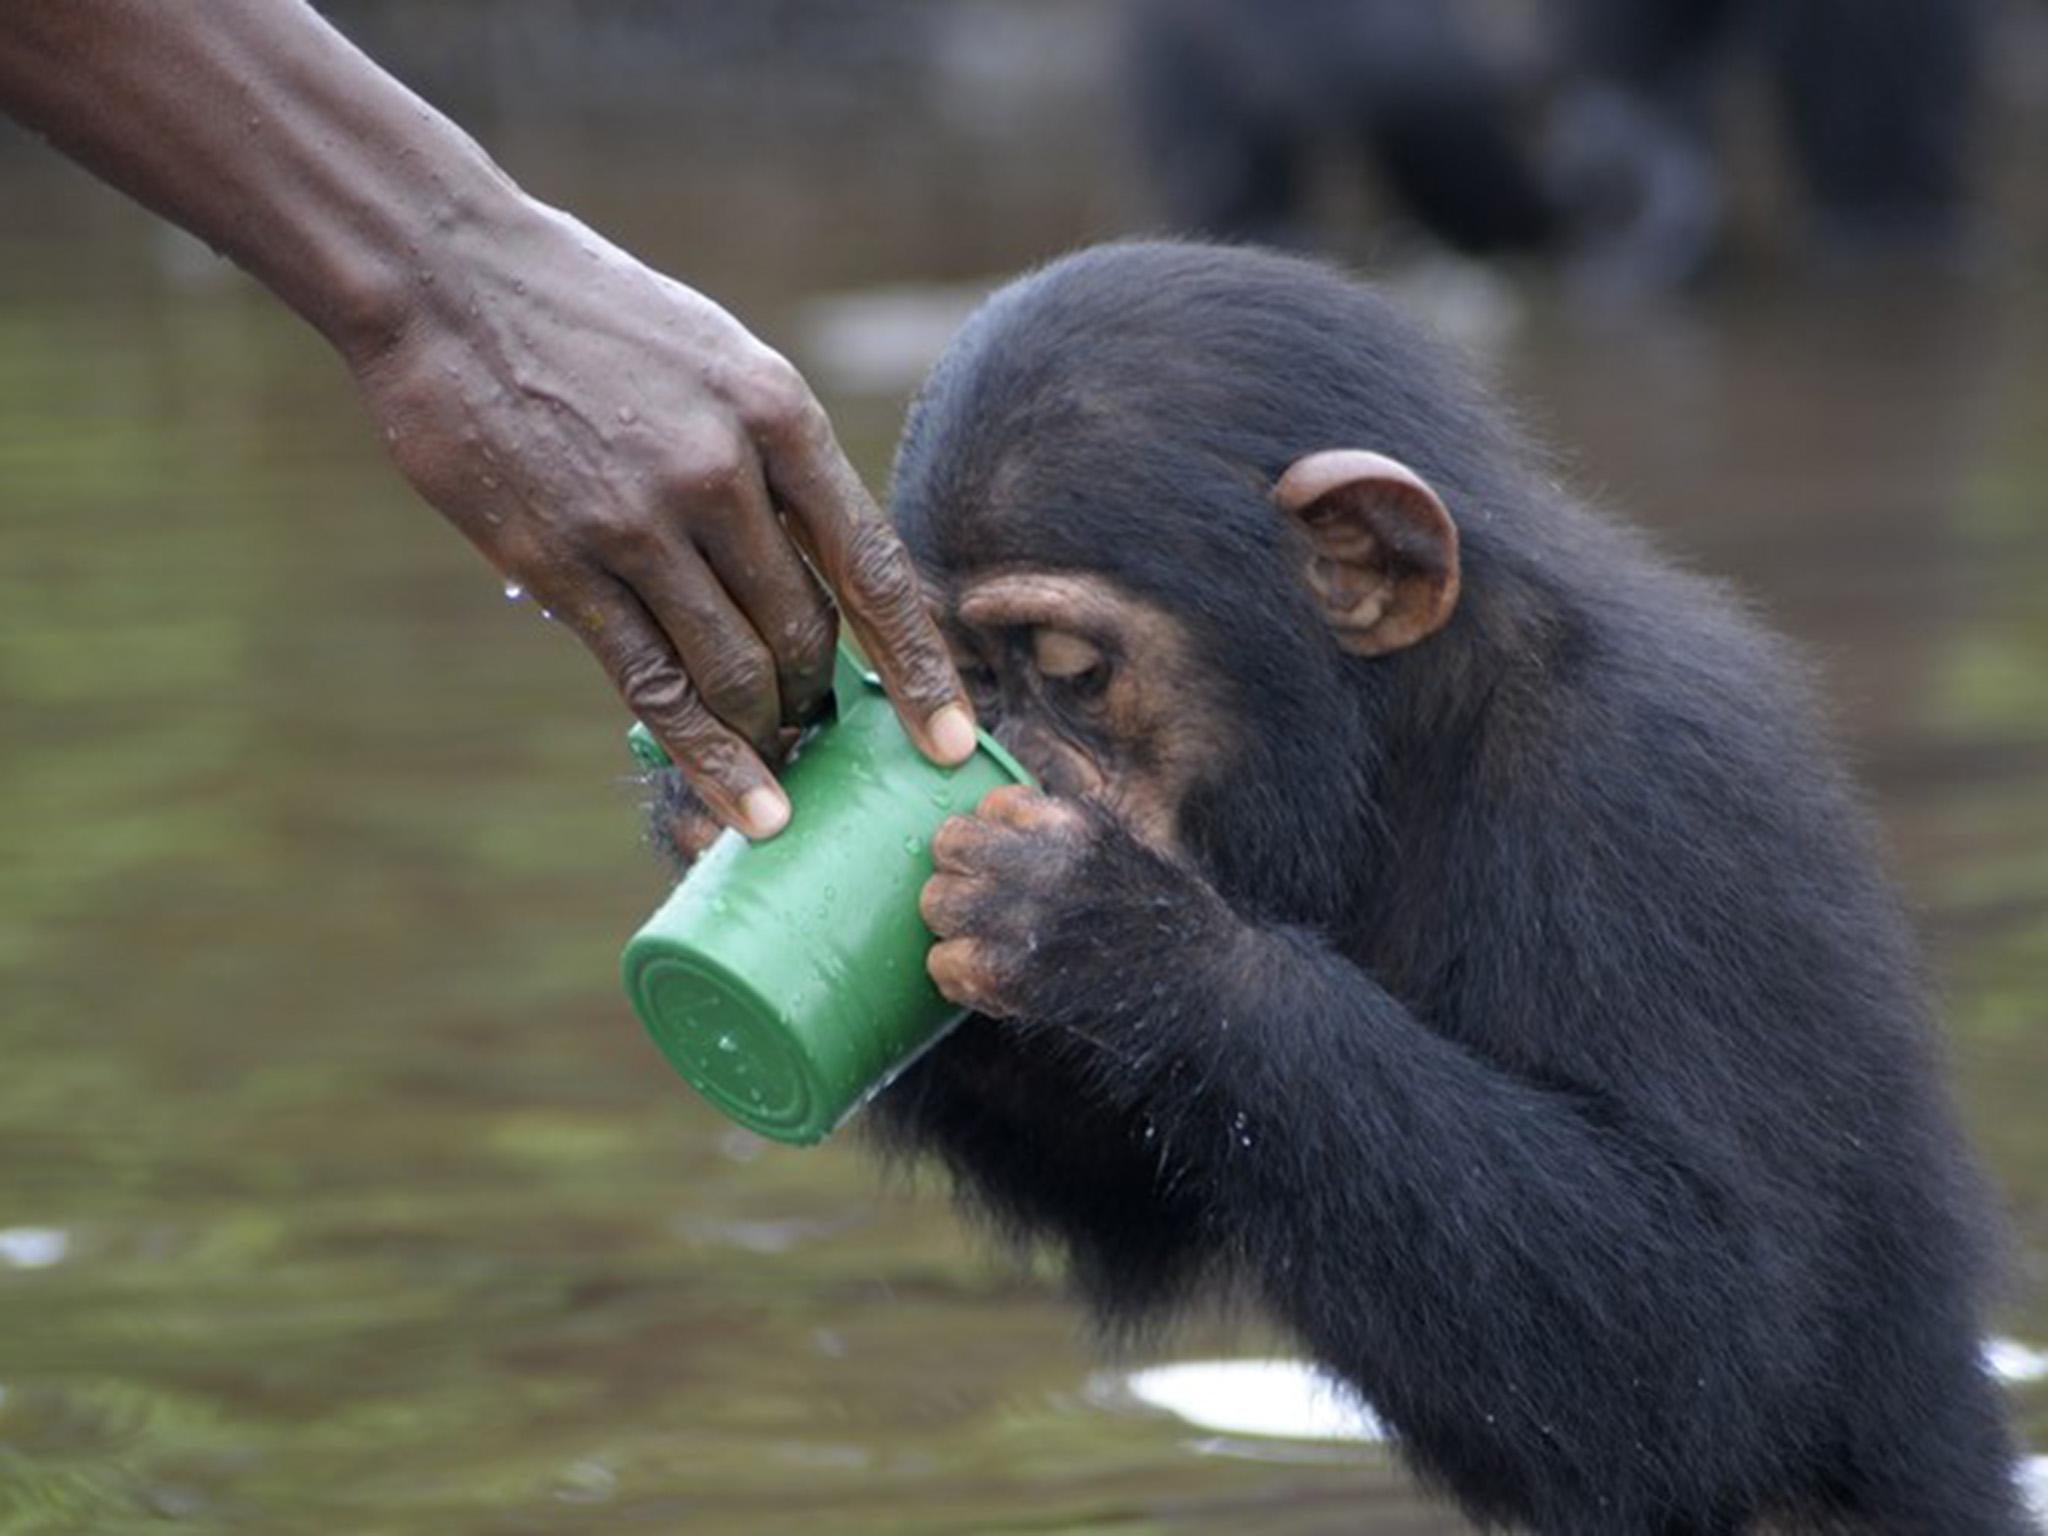 Without human assistance, the chimpanzees left on the island will starve